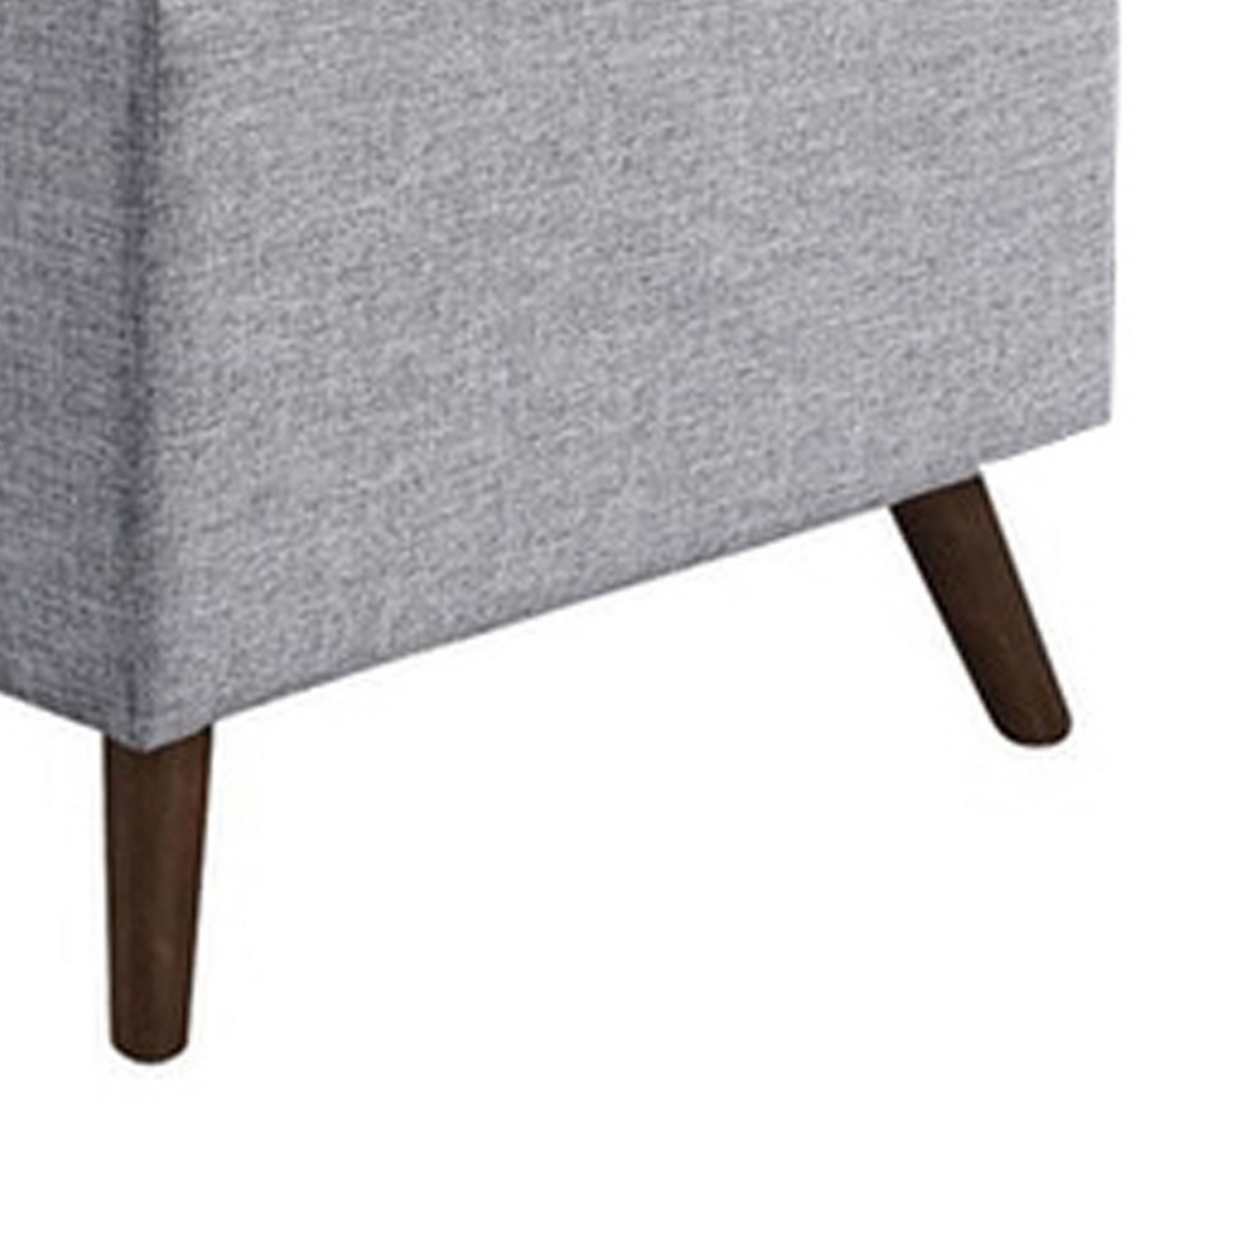 Fabric Upholstered Corner Chair With Tufted Back And Splayed Legs, Gray- Saltoro Sherpi